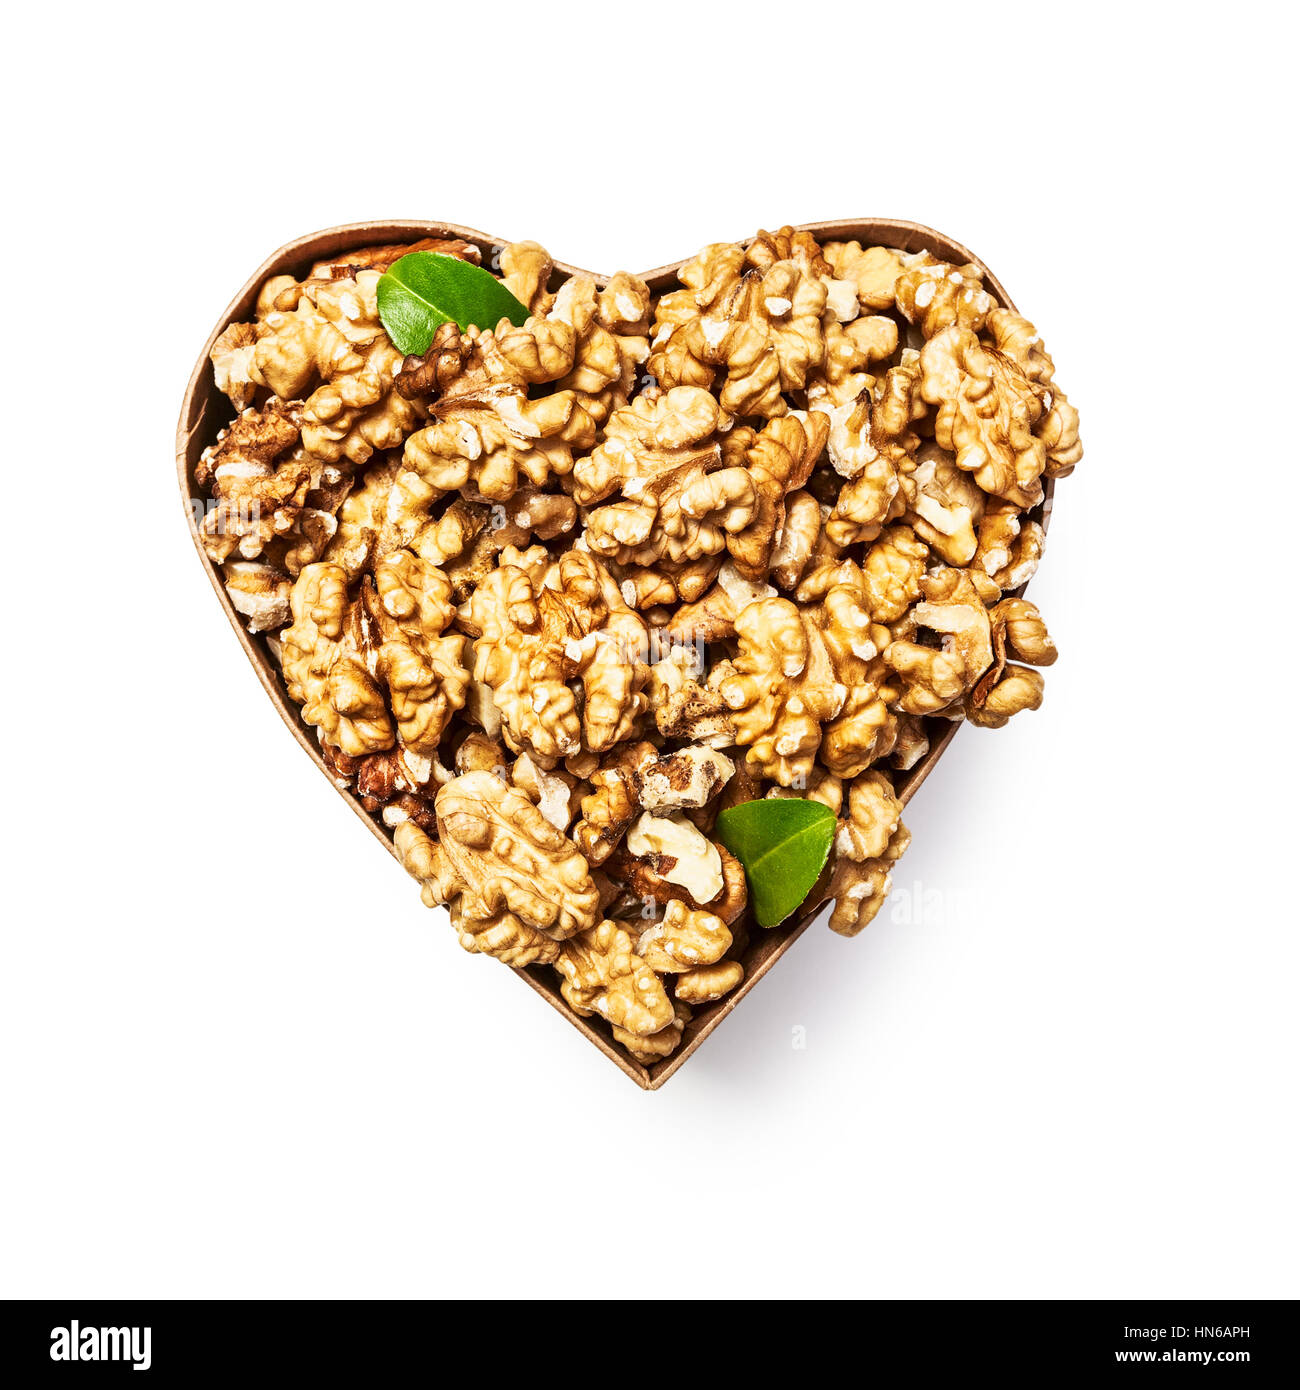 Walnut kernels in heart shaped box as healthy eating and alternative medicine concept, single object isolated on white background with clipping path,  Stock Photo